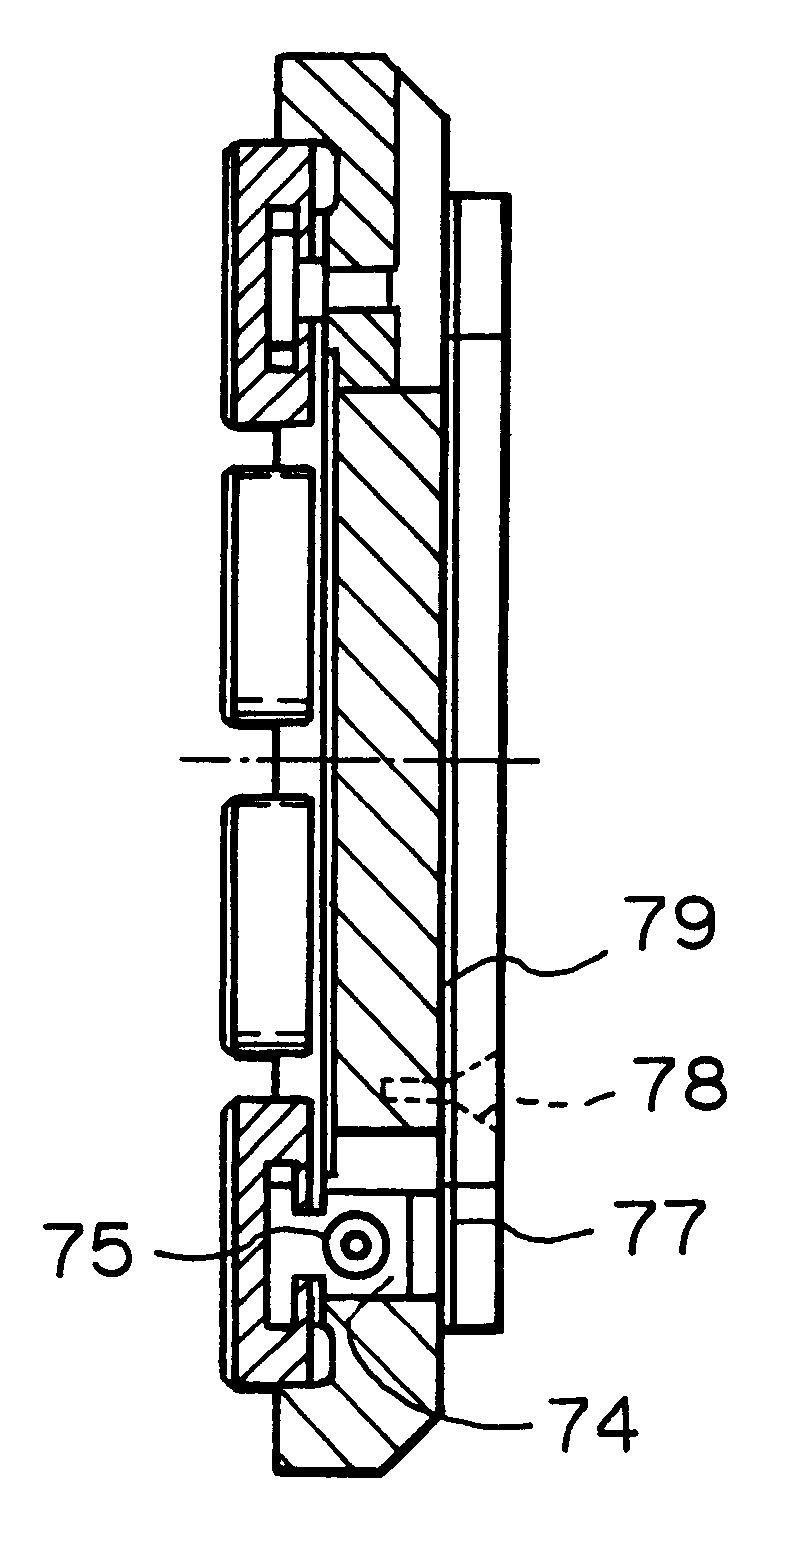 Water lubricated machine component having contacting sliding surfaces